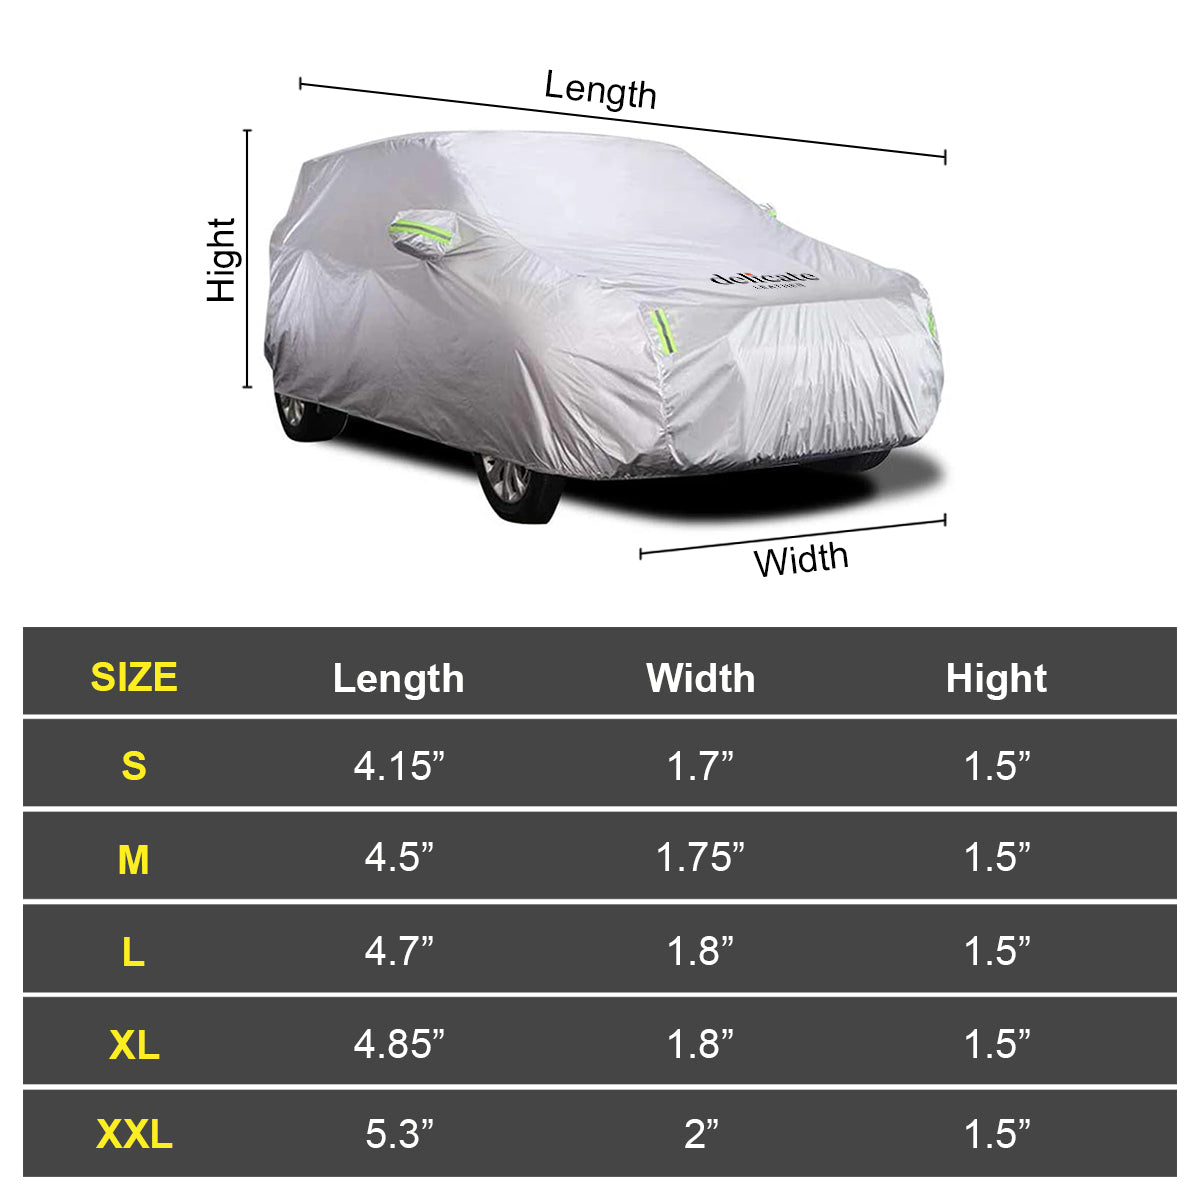 Car Cover Waterproof All Weather for Automobiles, Custom fit for car, Outdoor Full Cover Rain Sun UV Protection